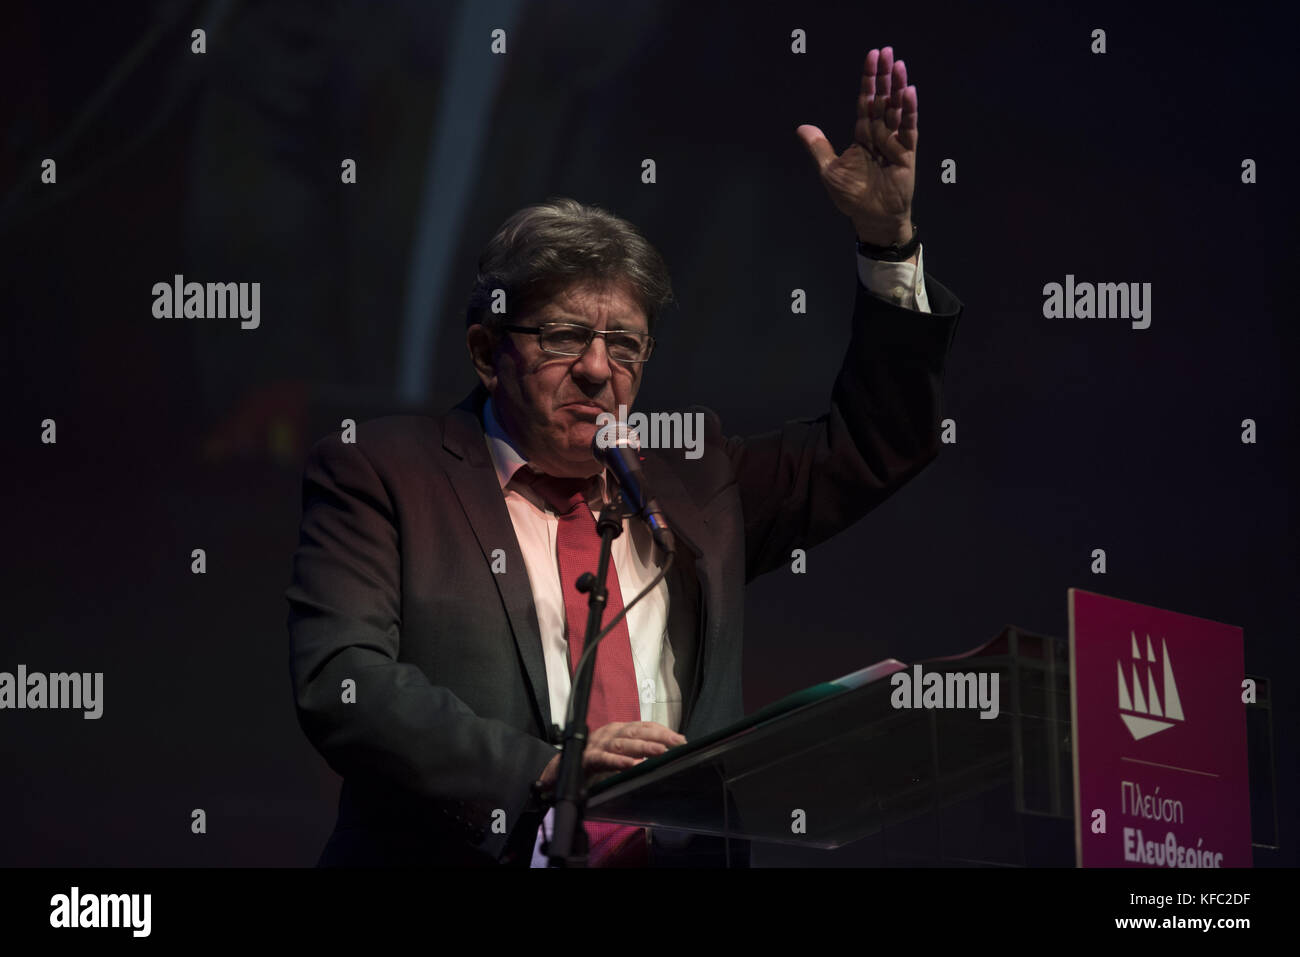 Athens, Greece. 27th Oct, 2017. JEAN-LUC MELENCHON addresses participants during the opening of the conference of Zoe Konstantopoulou's party Plefsi Eleftherias. Plefsi Eleftherias, meaning Sail of Freedom, was formed by governing party Syriza's dissident and former president of the Greek parliament, Zoe Konstantopoulou. Credit: Nikolas Georgiou/ZUMA Wire/Alamy Live News Stock Photo